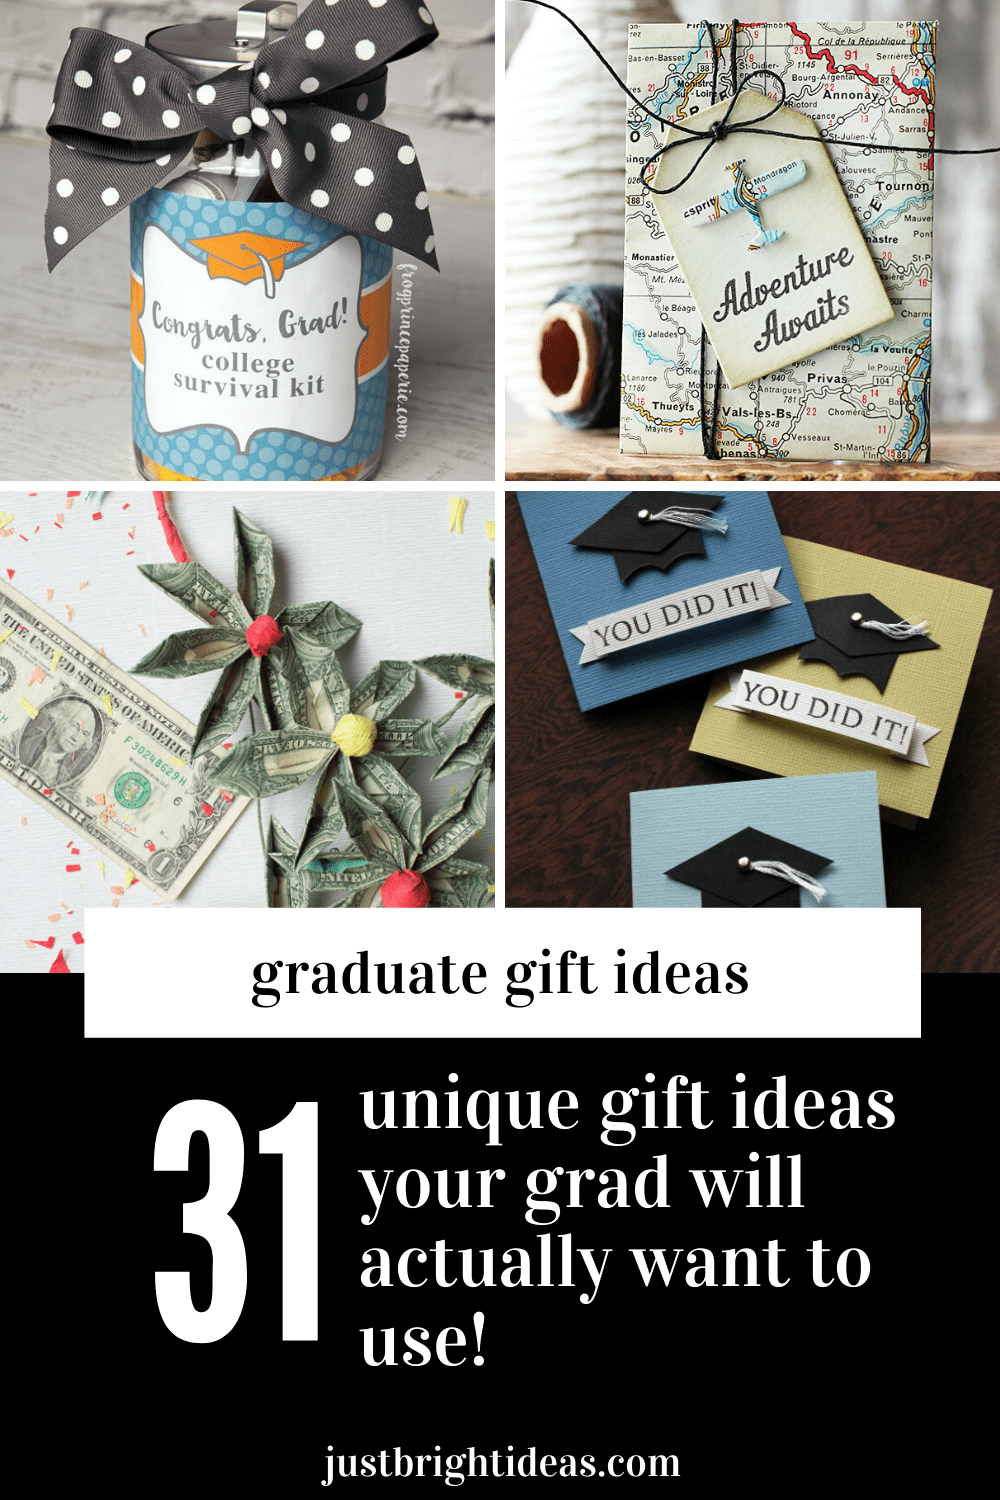 Whether you're looking for a clever way to gift them some cash or a special gift they'll treasure we've got more than 30 of the most unique college graduation gift ideas we could find to help you out!